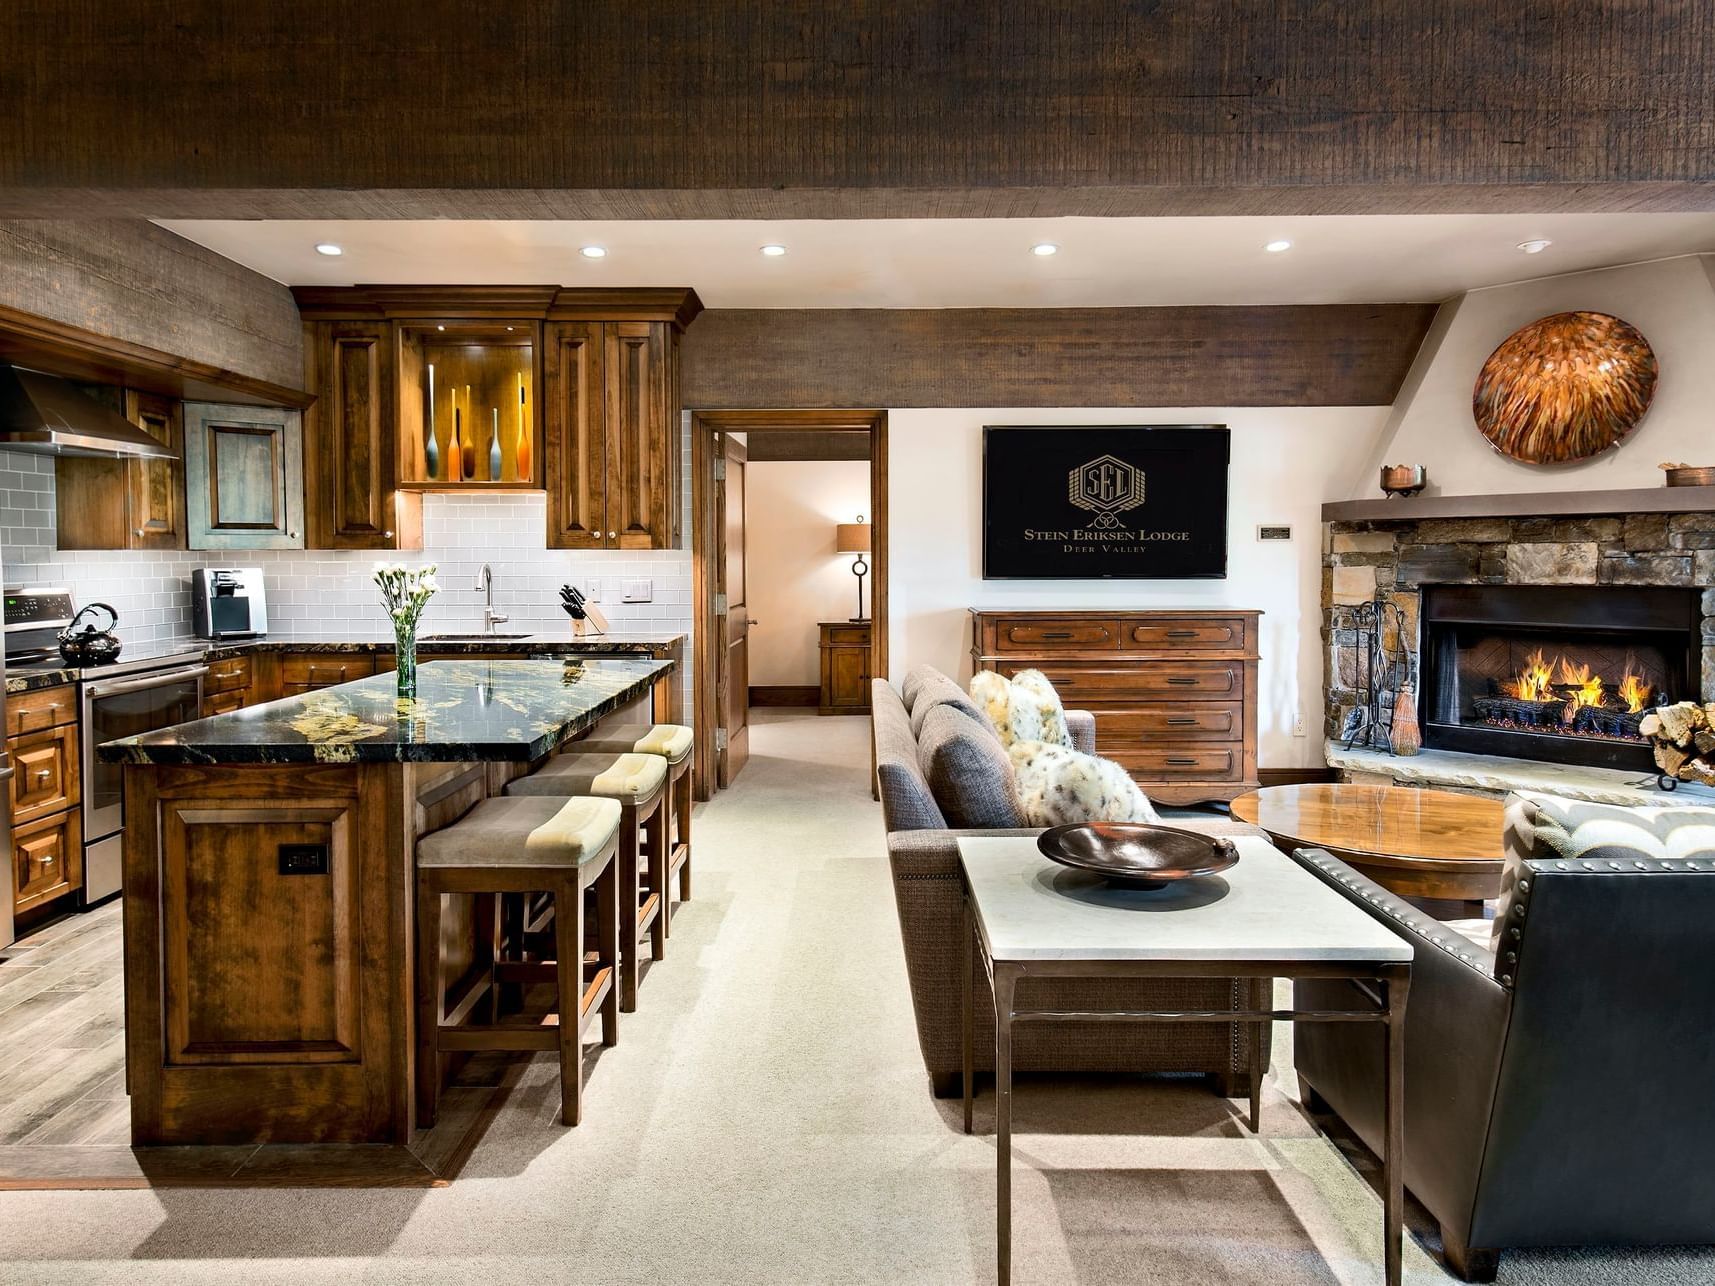 A kitchen & a living area at a suite in Stein Eriksen Lodge